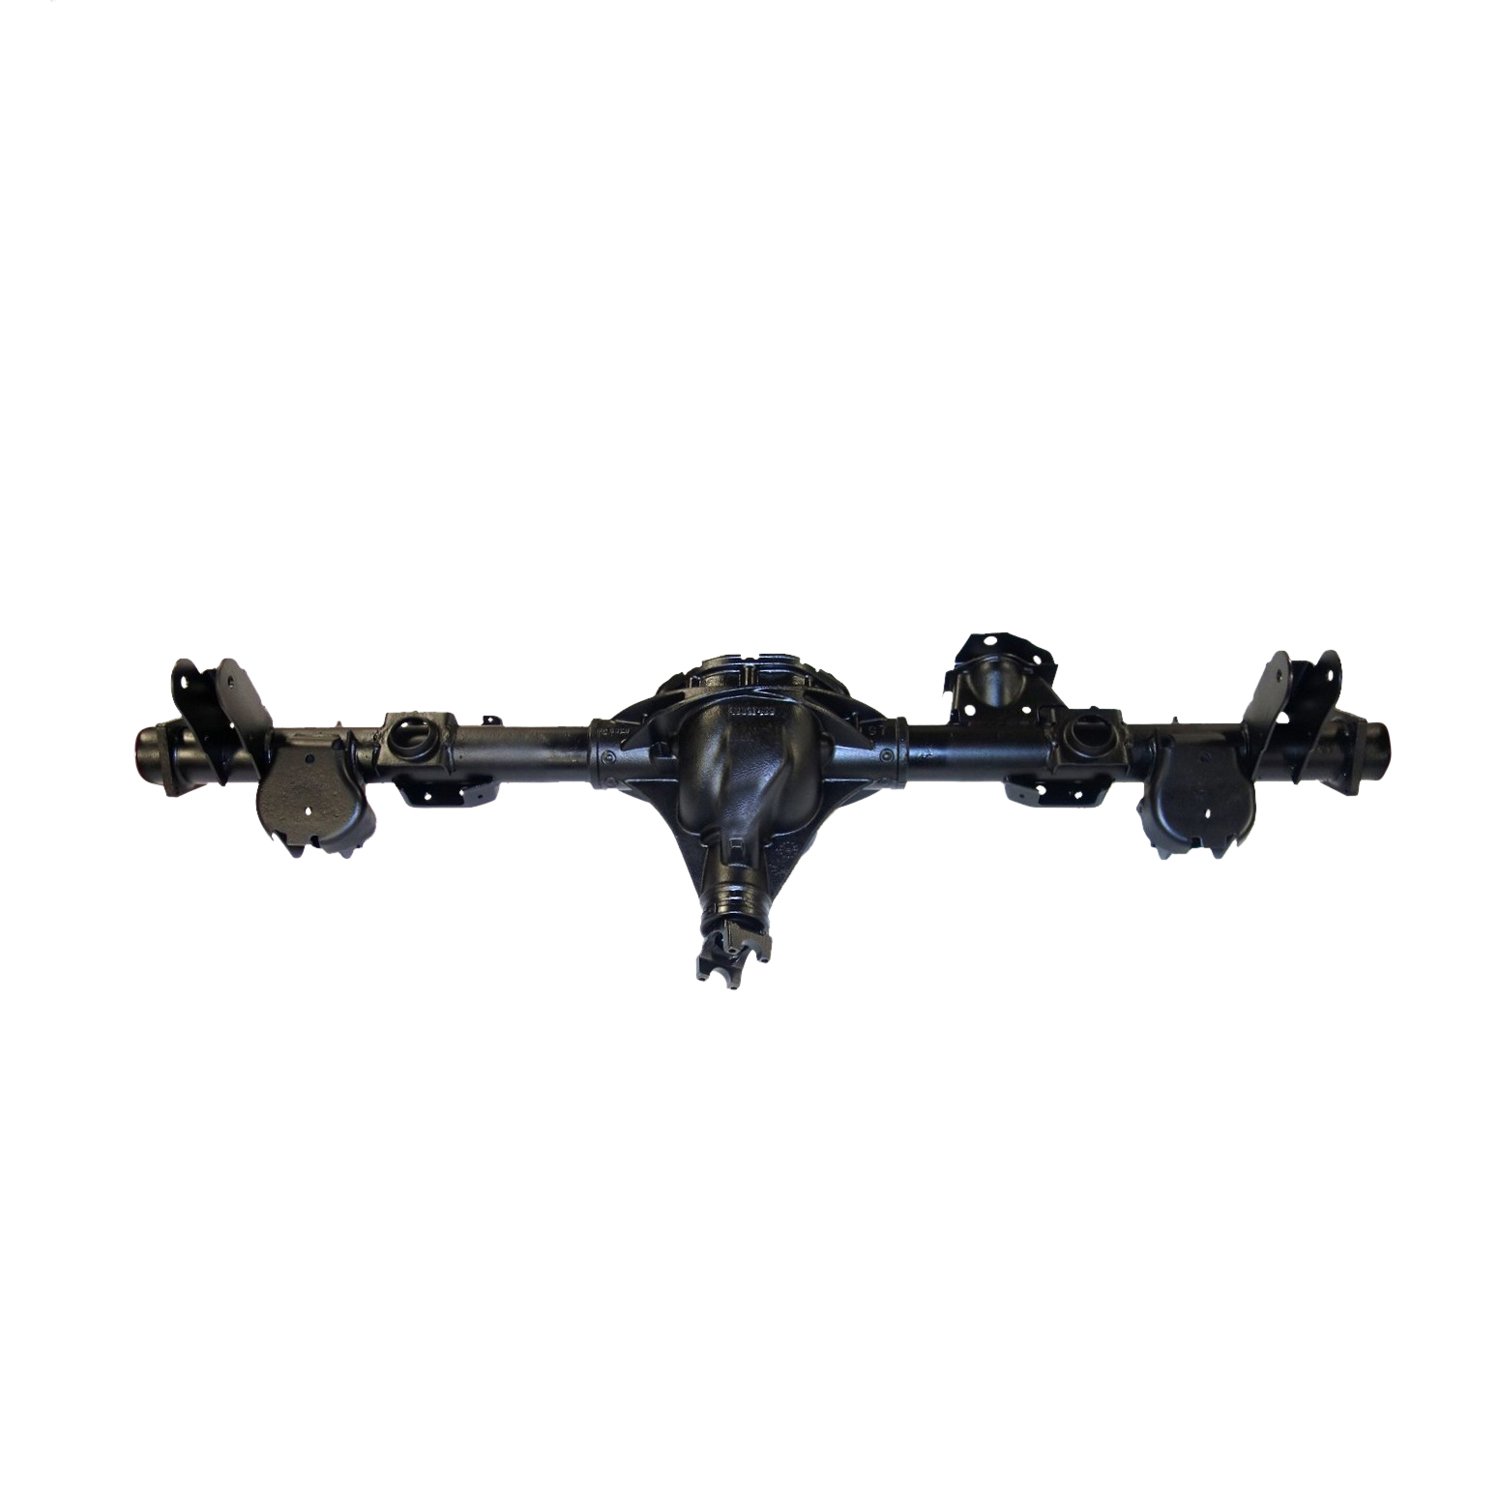 Remanufactured Axle Assembly for GM 8.6" 2007-08 GM Tahoe, Yukon, 3.08 Ratio, Posi